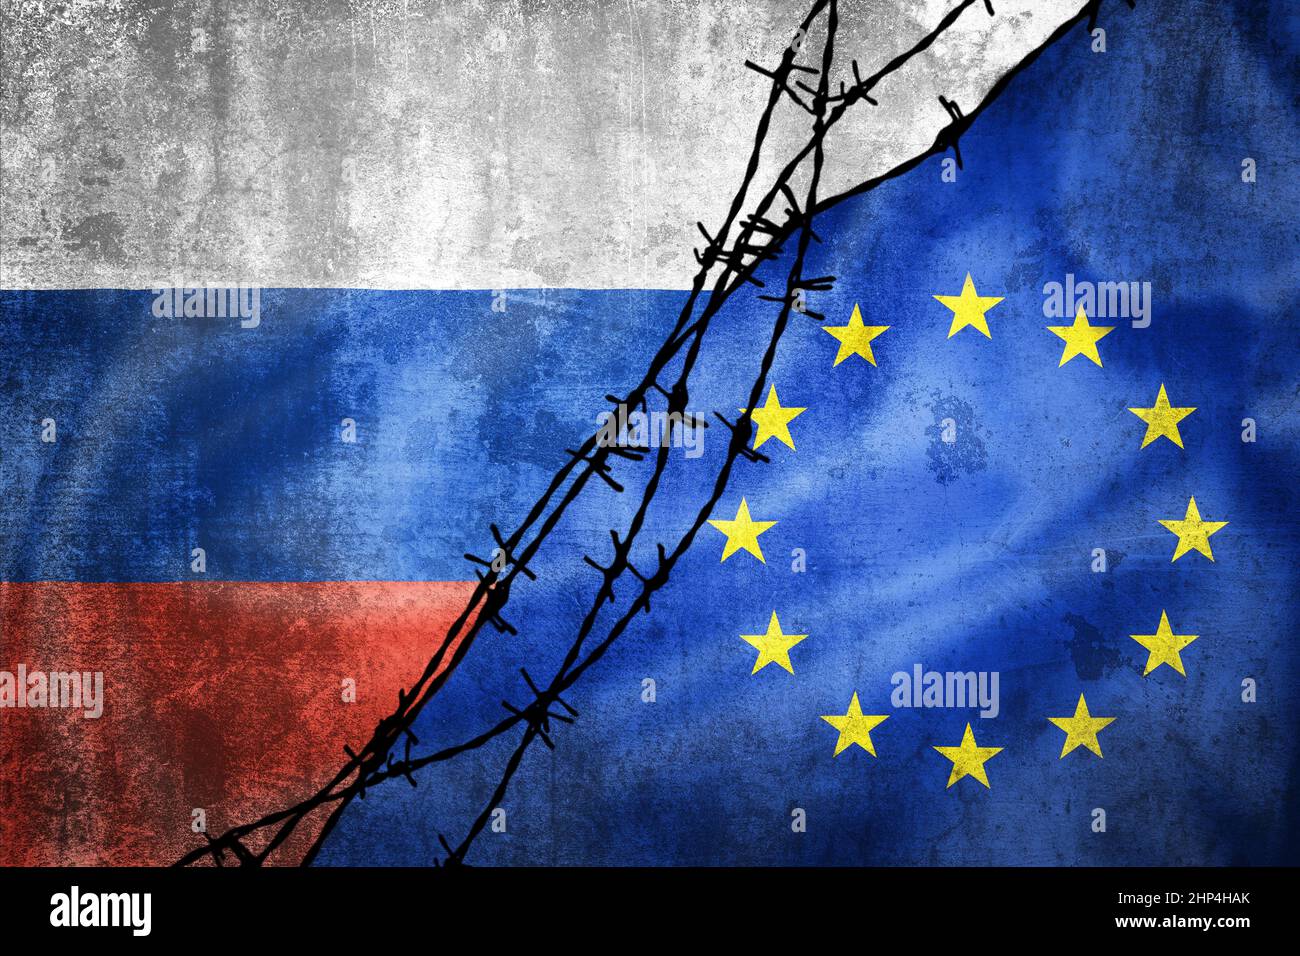 Grunge flags of Russia and European Union divided by barb wire illustration, concept of tense relations in Ukraine crisis Stock Photo